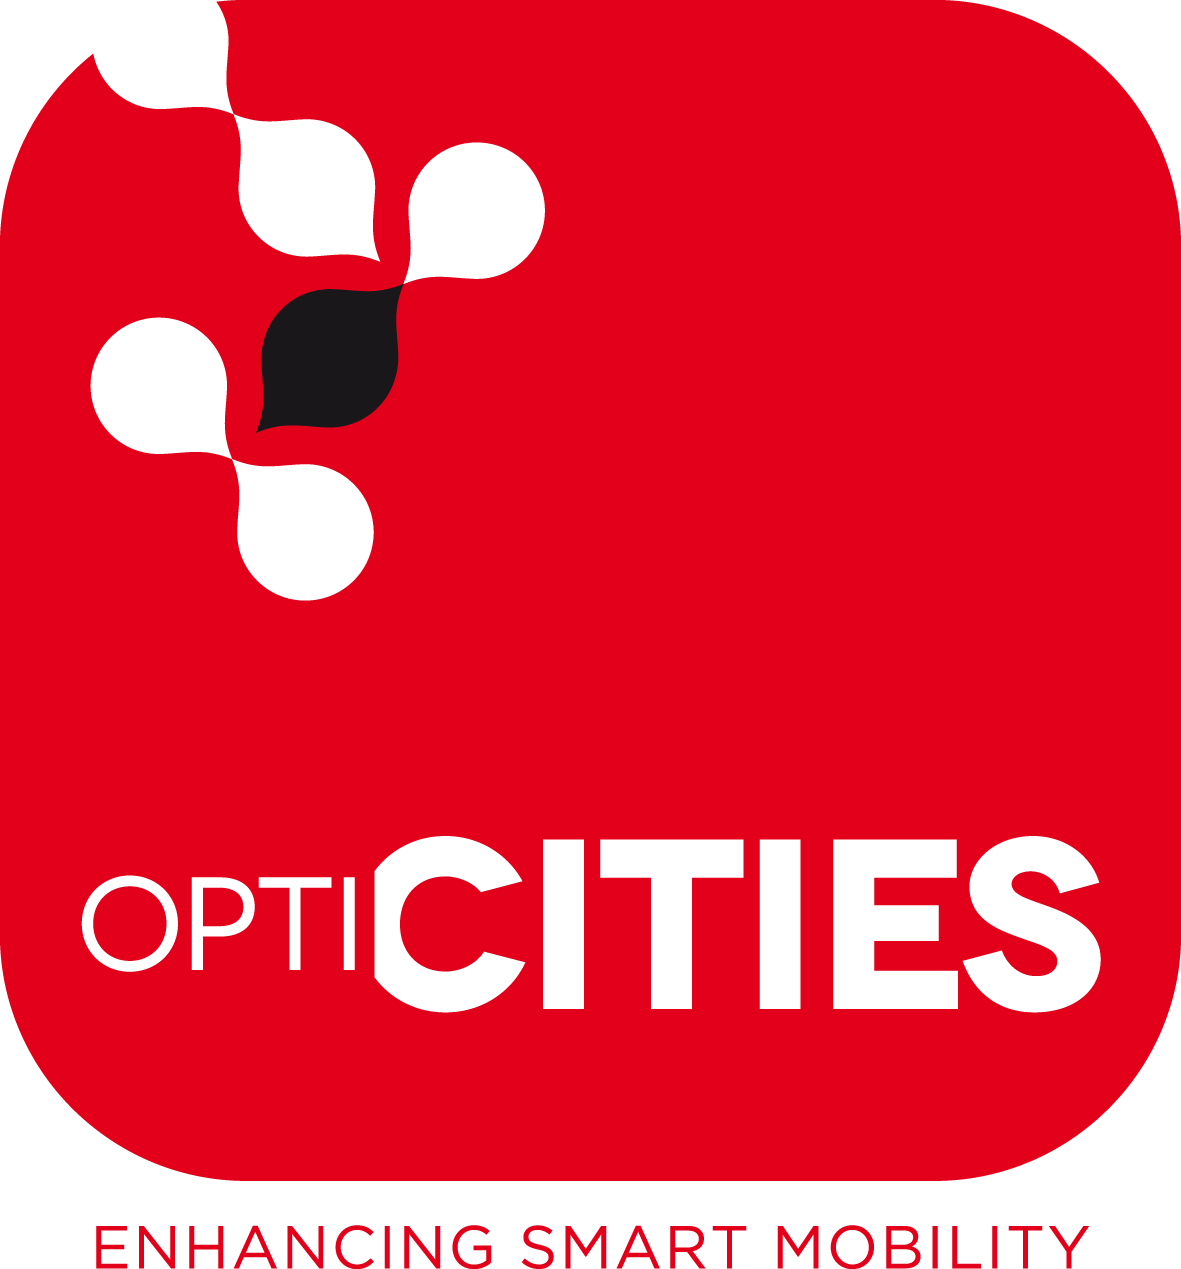 Optimise Citizen Mobility and Freight Management in Urban Environments is a FP7 project to optimise urban transport networks.